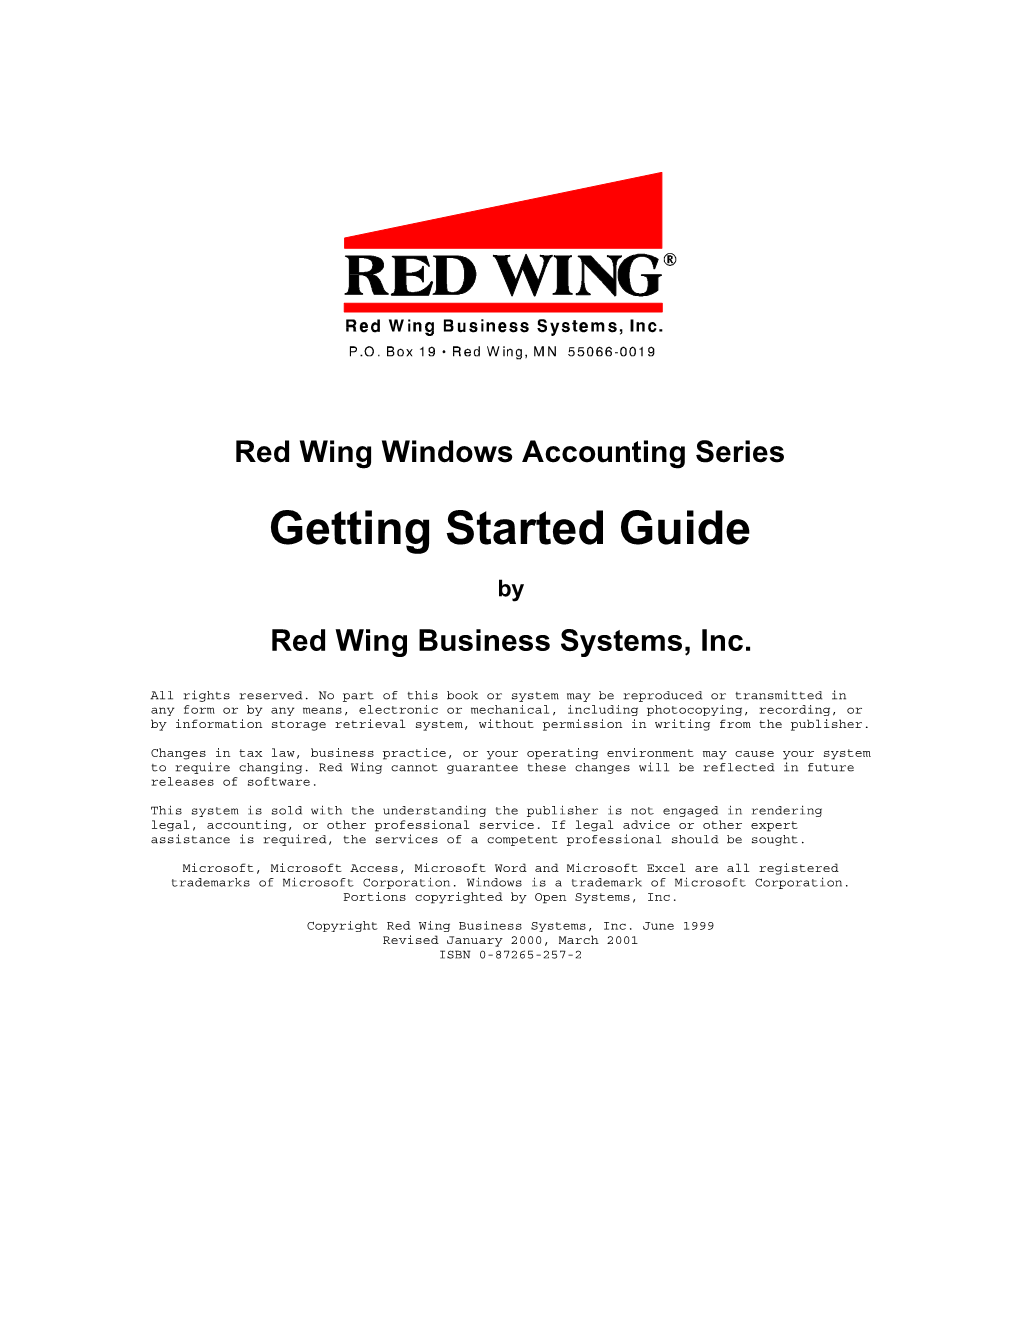 Red Wing Windows Accounting Series Getting Started Guide